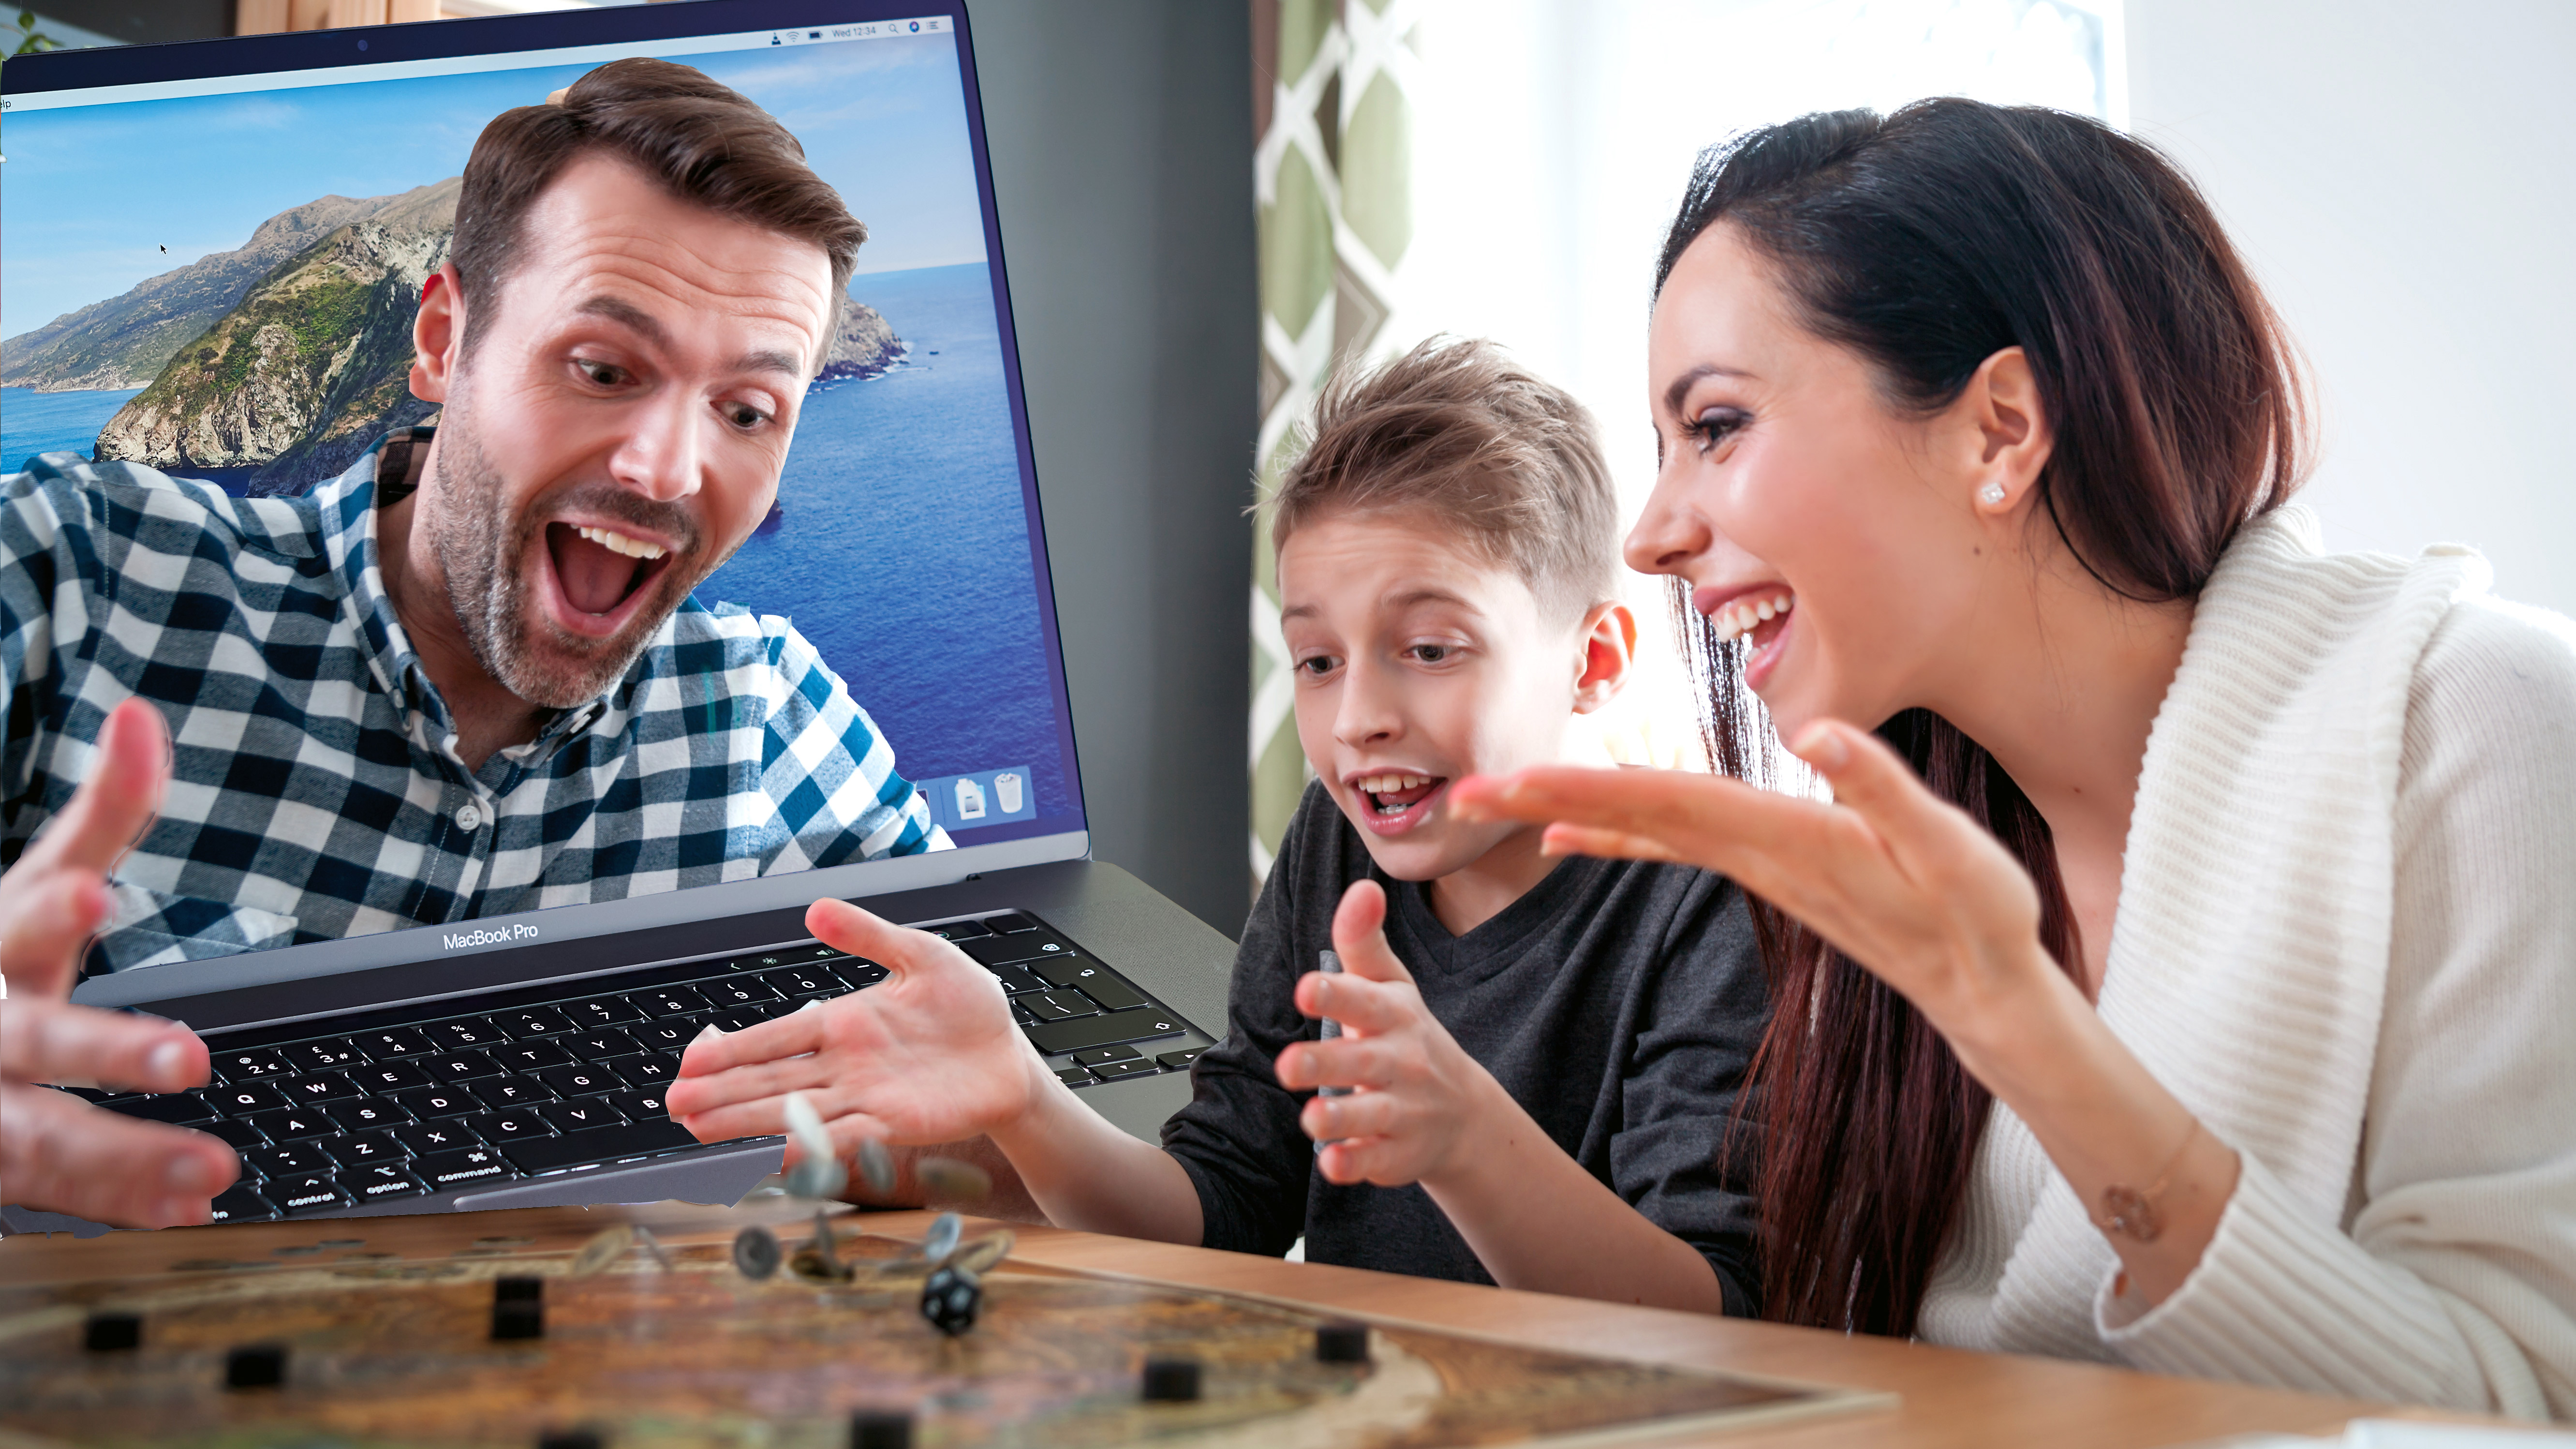 How To Play Board Games Online Play With Friends Or Family Over The Web Techradar